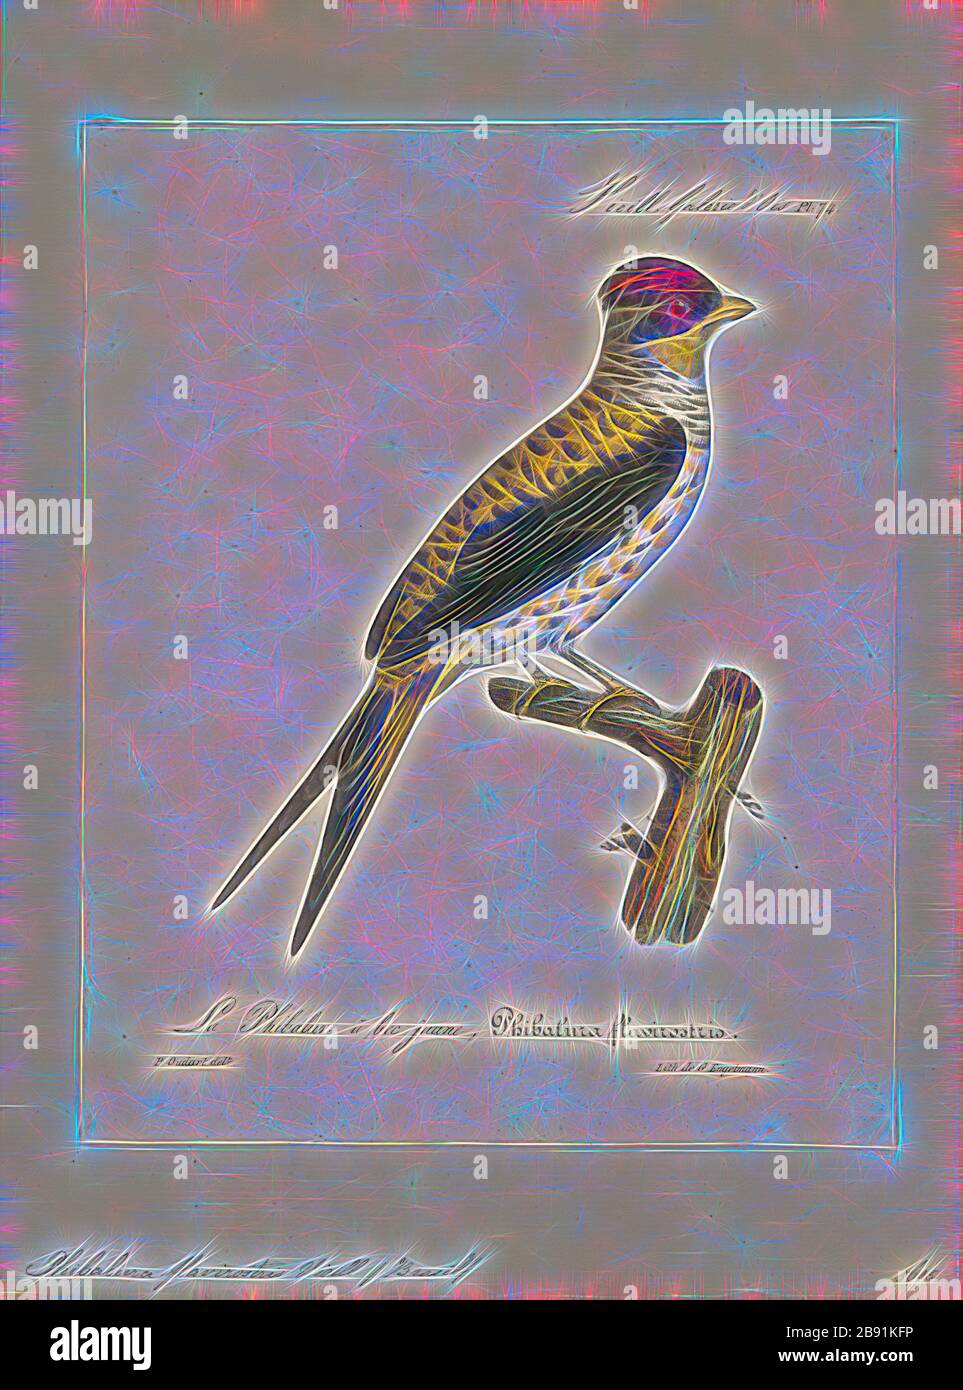 Phibalura flavirostris, Print, The swallow-tailed cotinga (Phibalura flavirostris) is a species of passerine bird in the family Cotingidae. It is the only member of the genus Phibalura., 1825-1834, Reimagined by Gibon, design of warm cheerful glowing of brightness and light rays radiance. Classic art reinvented with a modern twist. Photography inspired by futurism, embracing dynamic energy of modern technology, movement, speed and revolutionize culture. Stock Photo